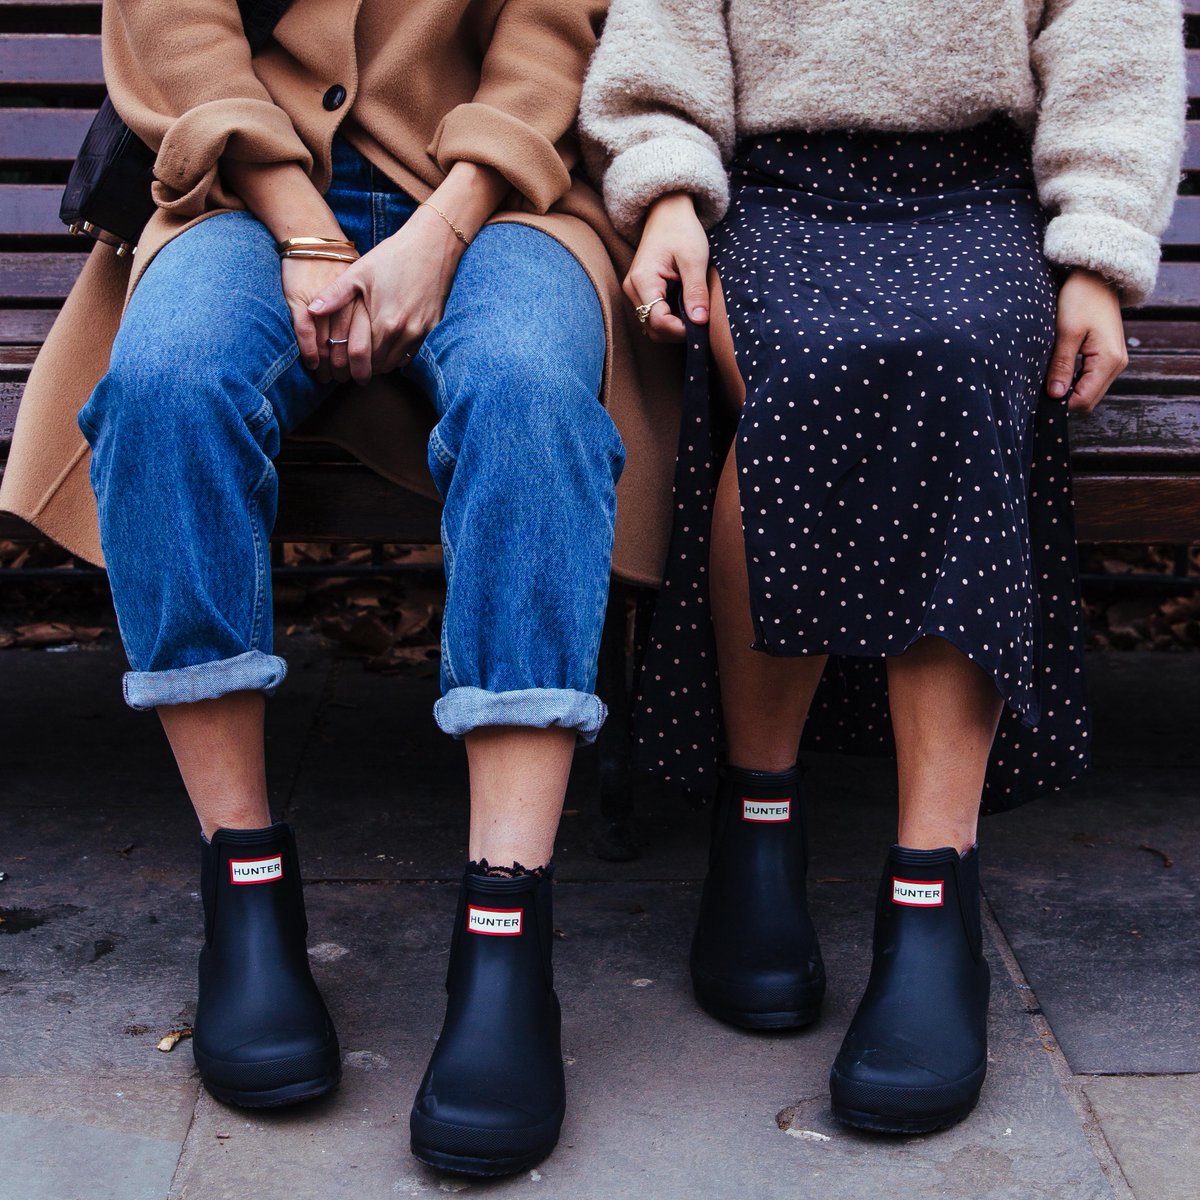 on X: "Show us how to style the Original Chelsea Boot like the @CollyerTwins, share your #HunterBoots style: https://t.co/r8xWKSDm16 https://t.co/wMsxwqX9ZX" / X